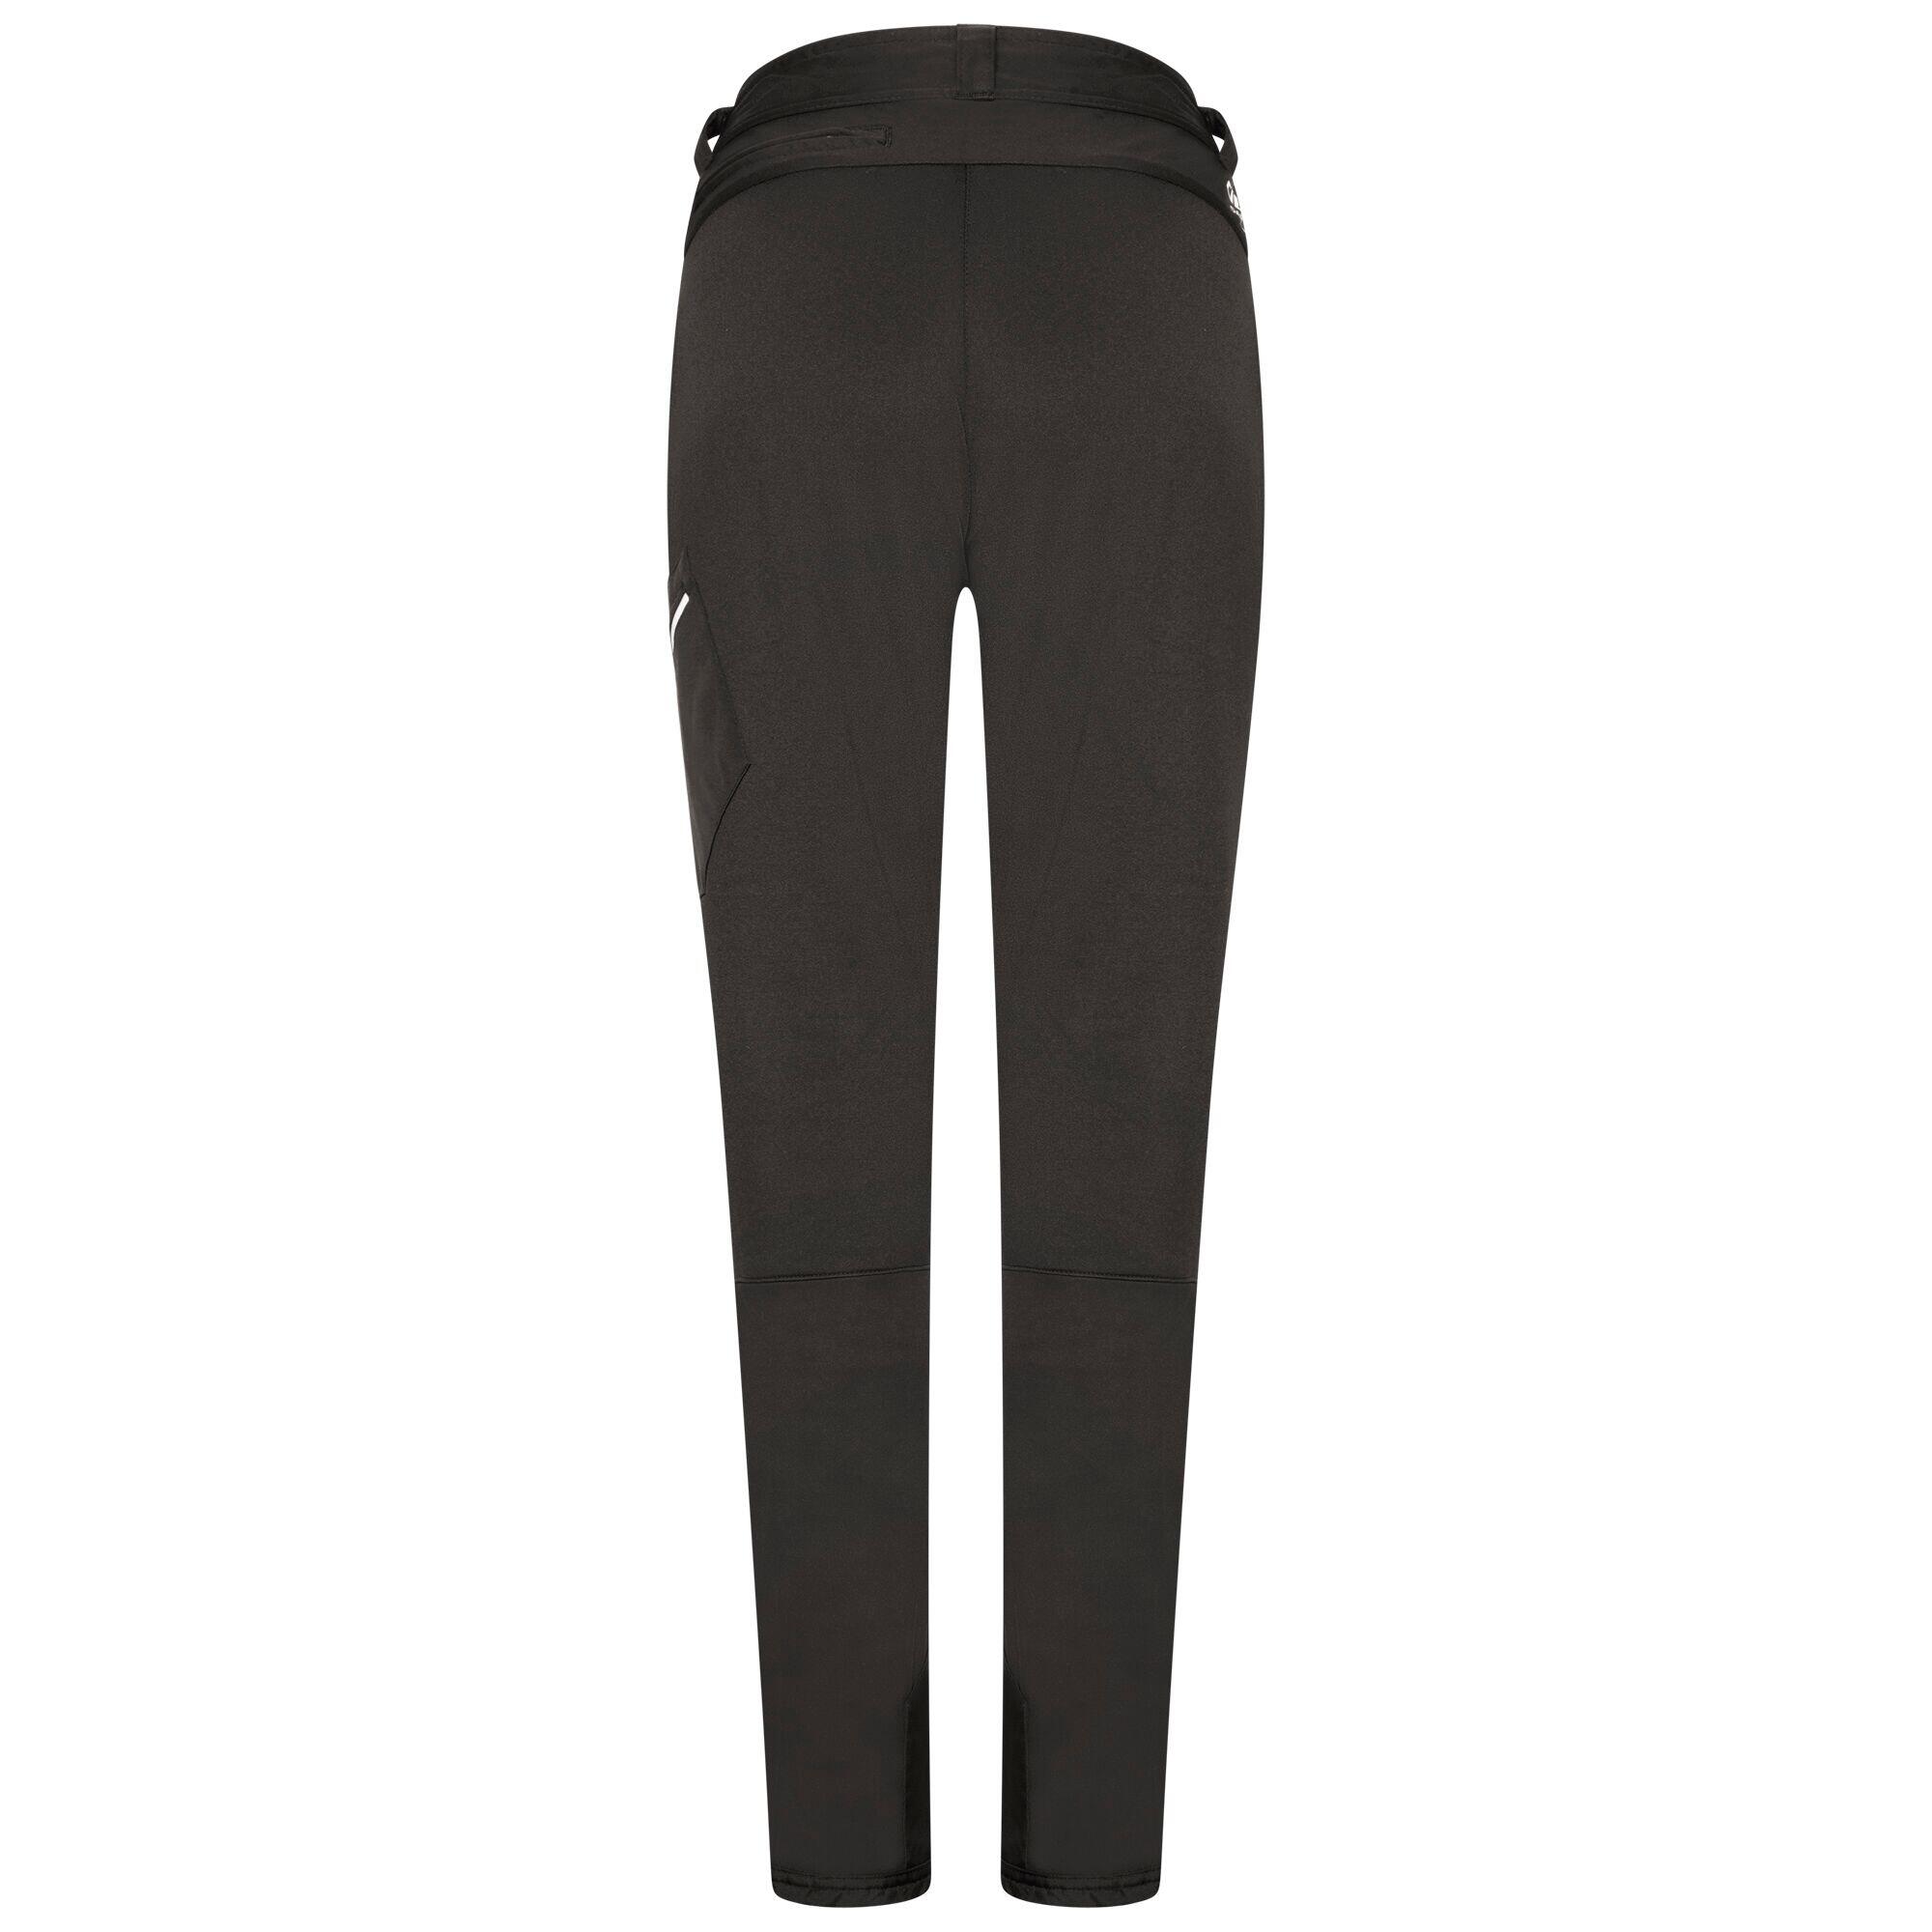 Appended II Women's Hiking Trousers - Black 3/7